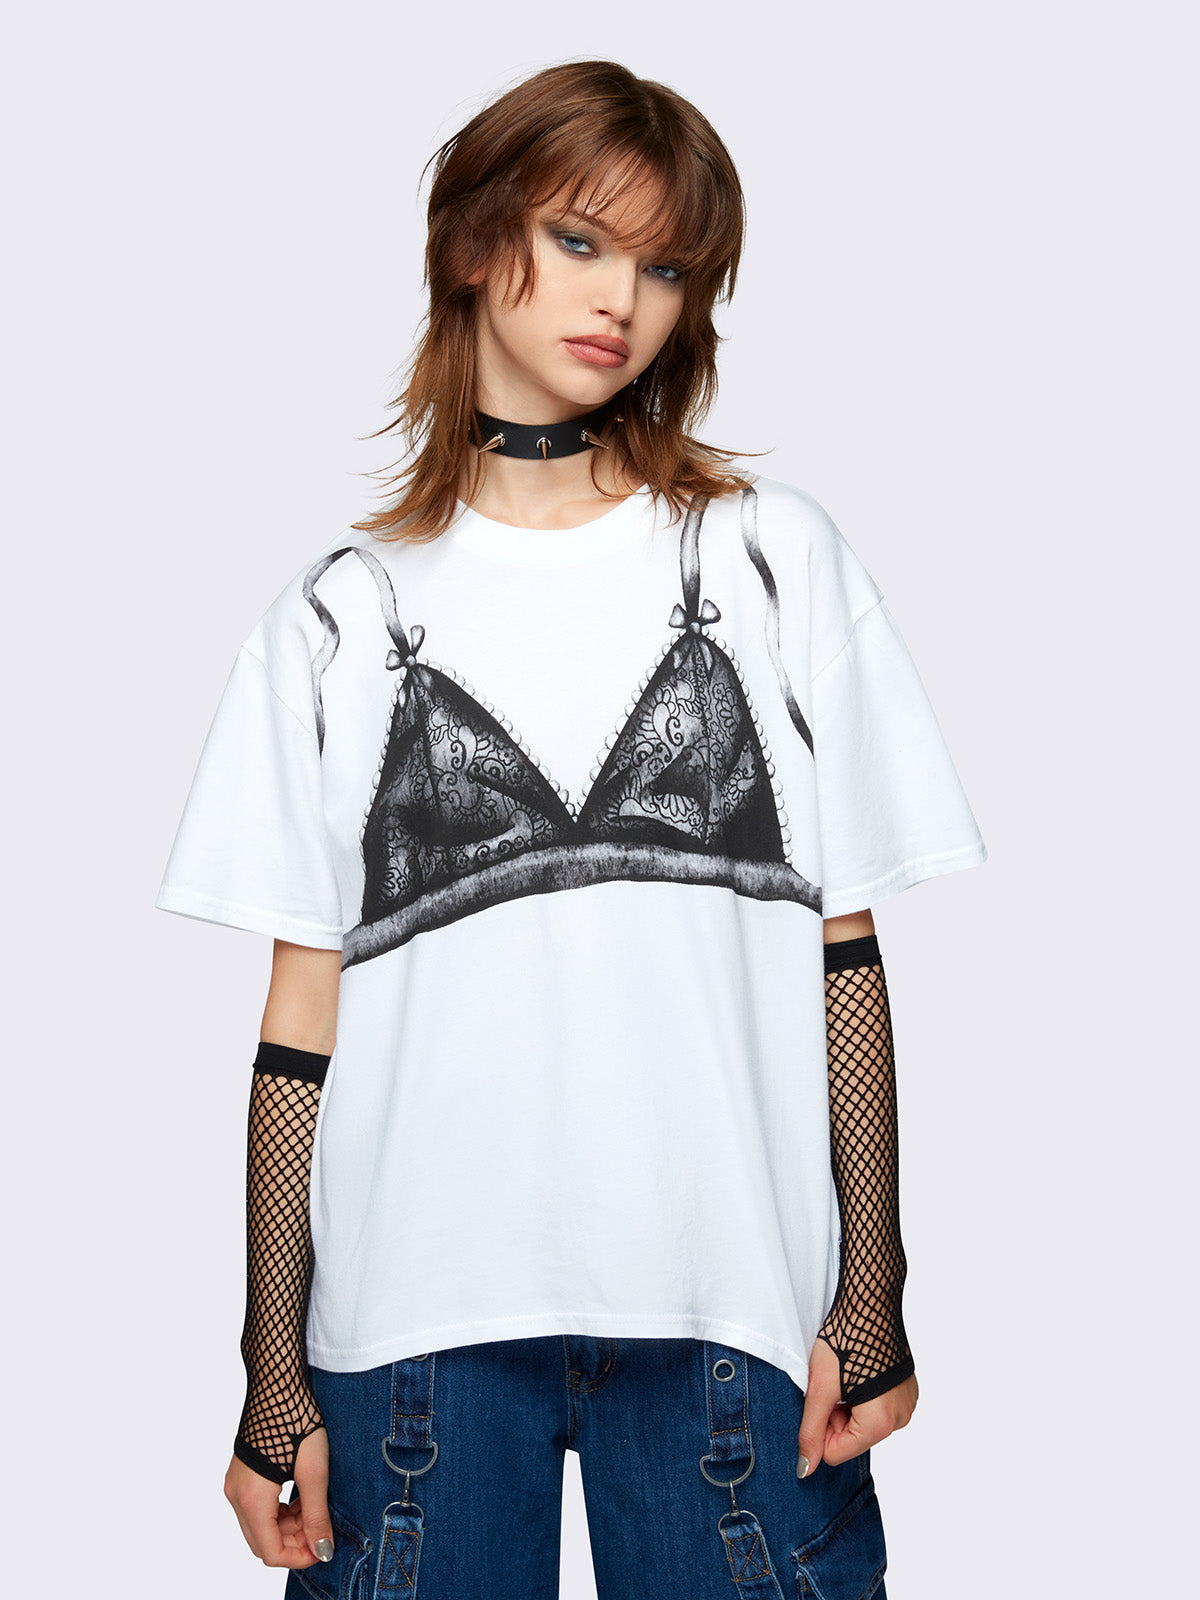 Oversized t-shirt in white with bra graphic print